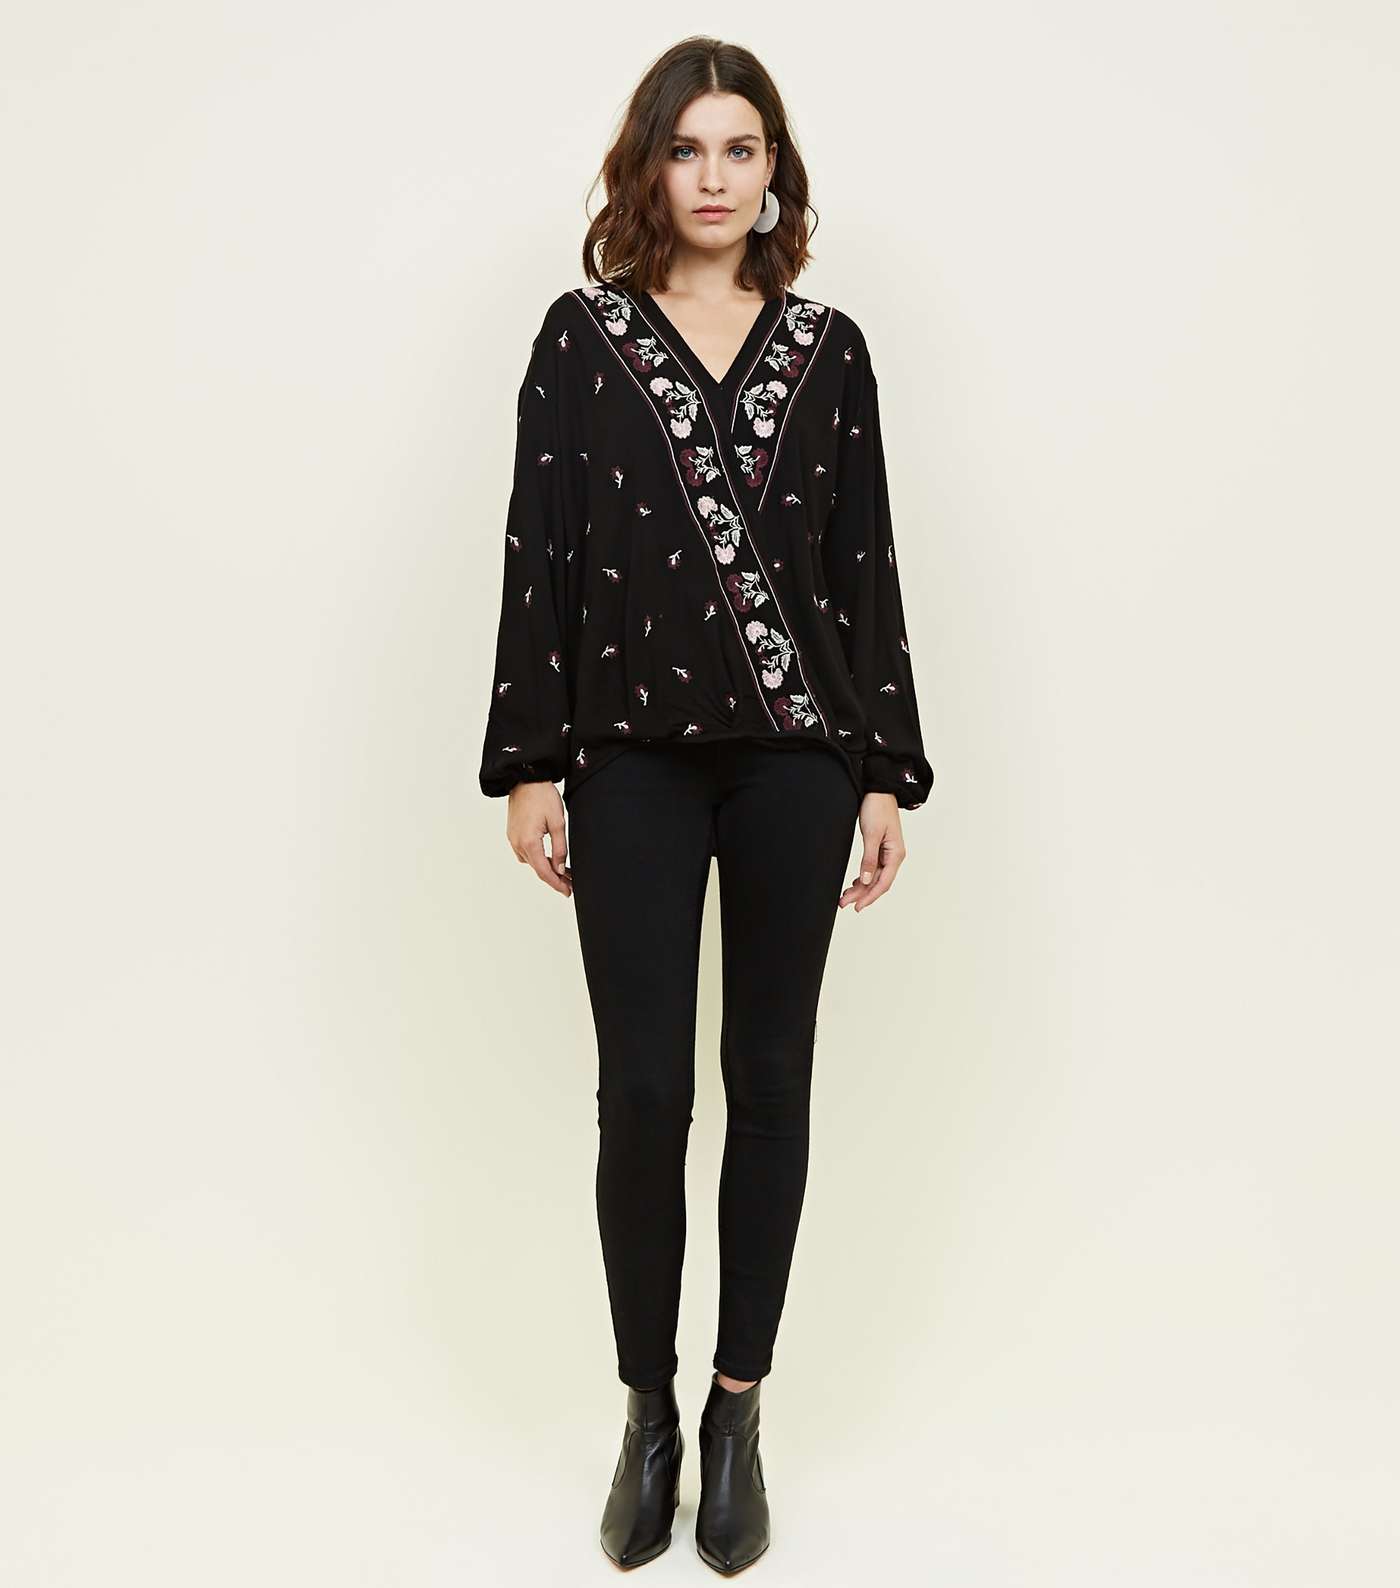 Apricot Black Floral Embroidered Wrap Top Image 2